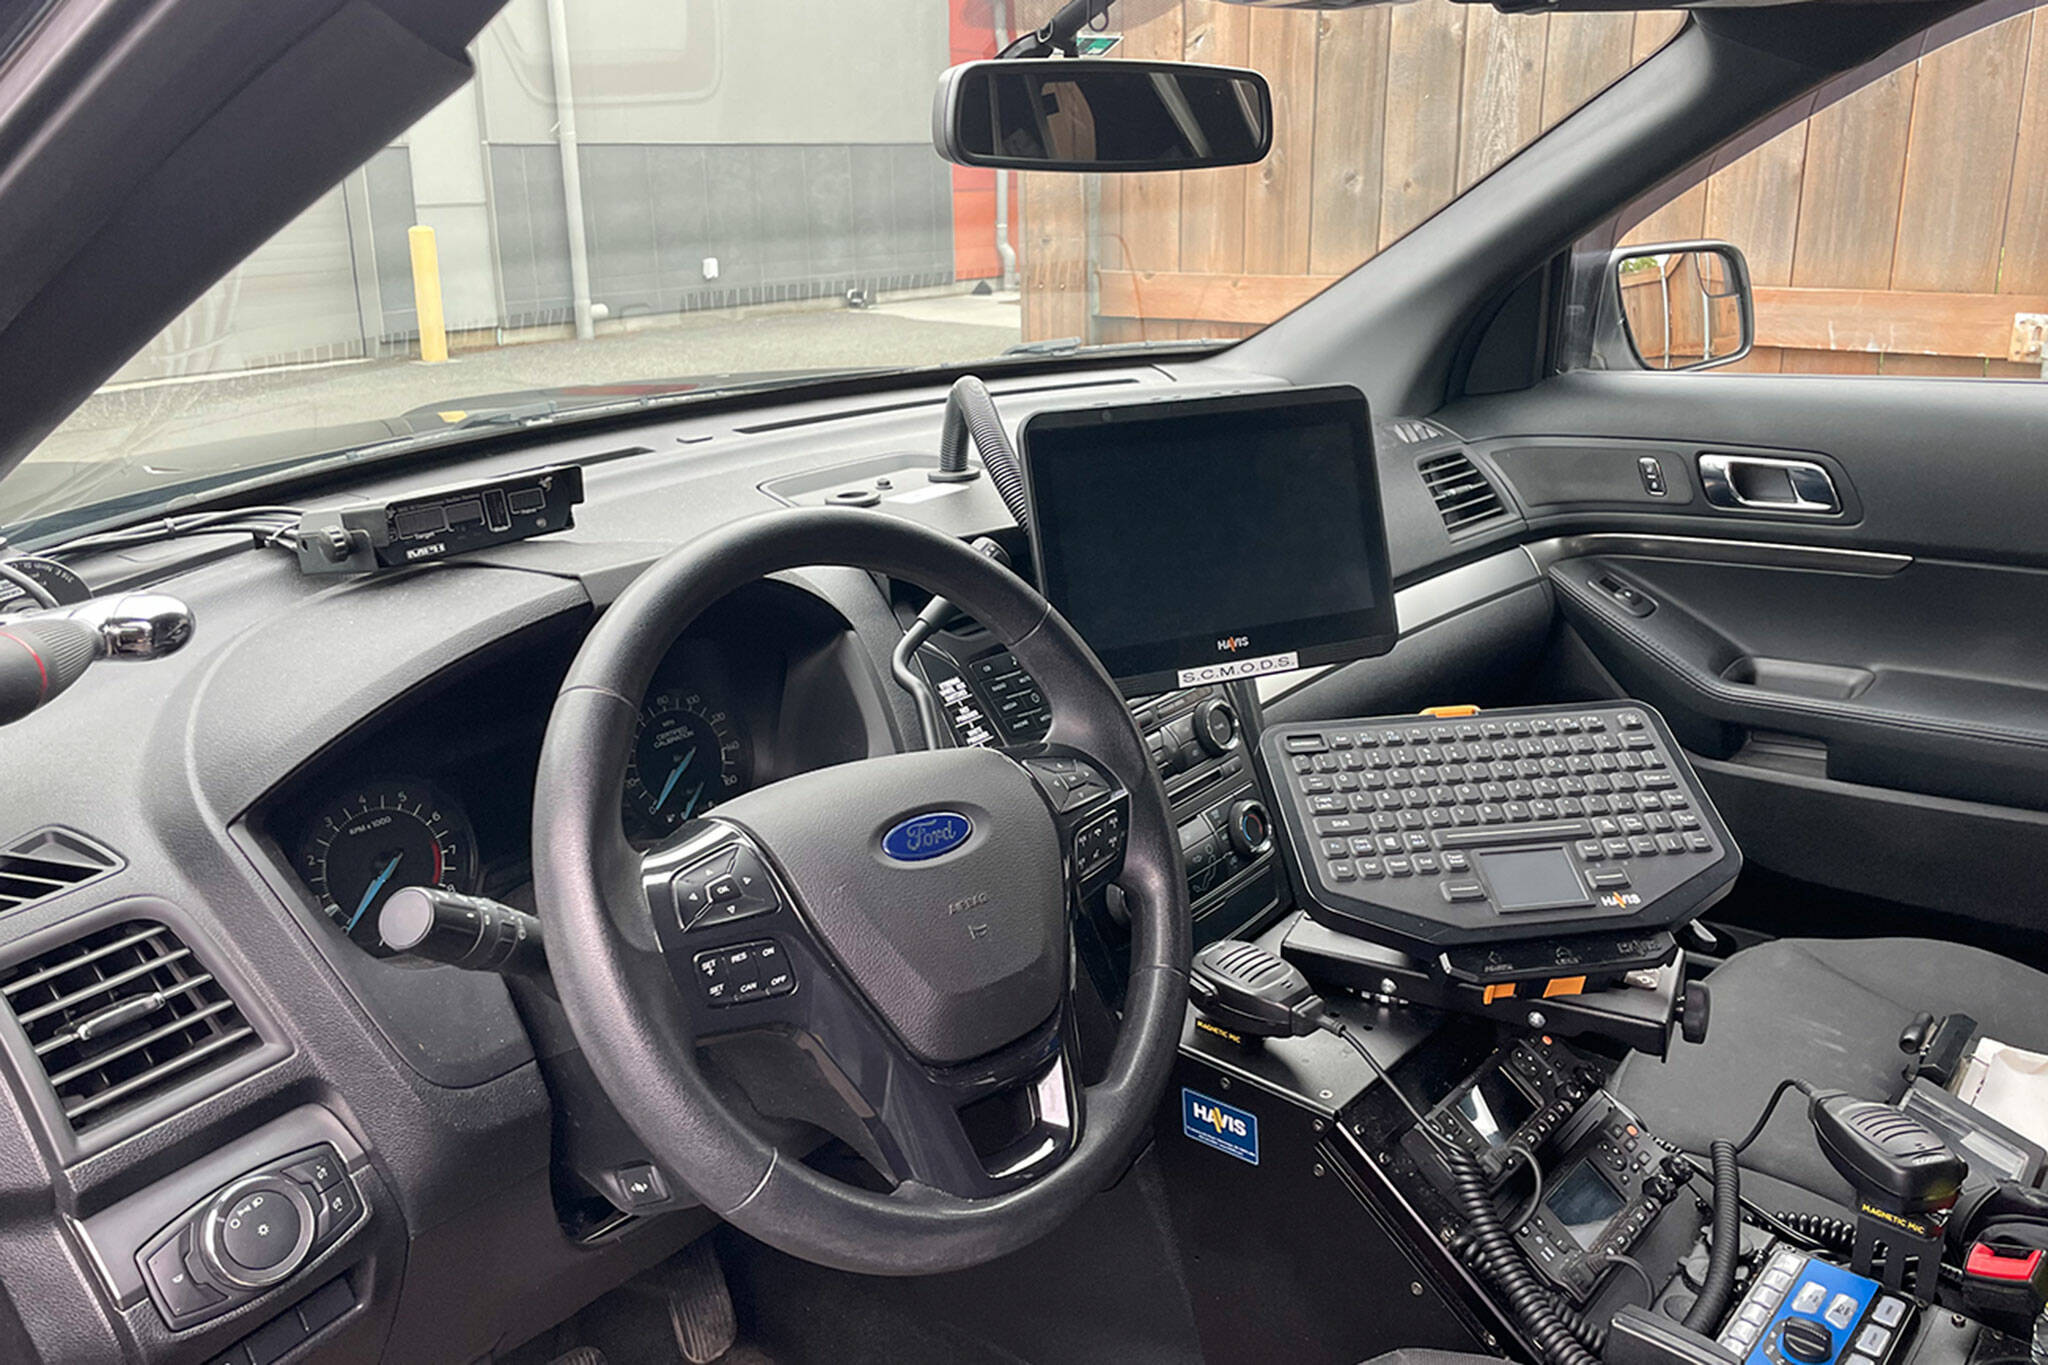 Sequim Gazette photo by Matthew Nash/ All Sequim Police vehicles will include dash mounted cameras by the end of the year after Sequim city councilors agreed to a contract with LensLock for both dash and body-worn cameras.